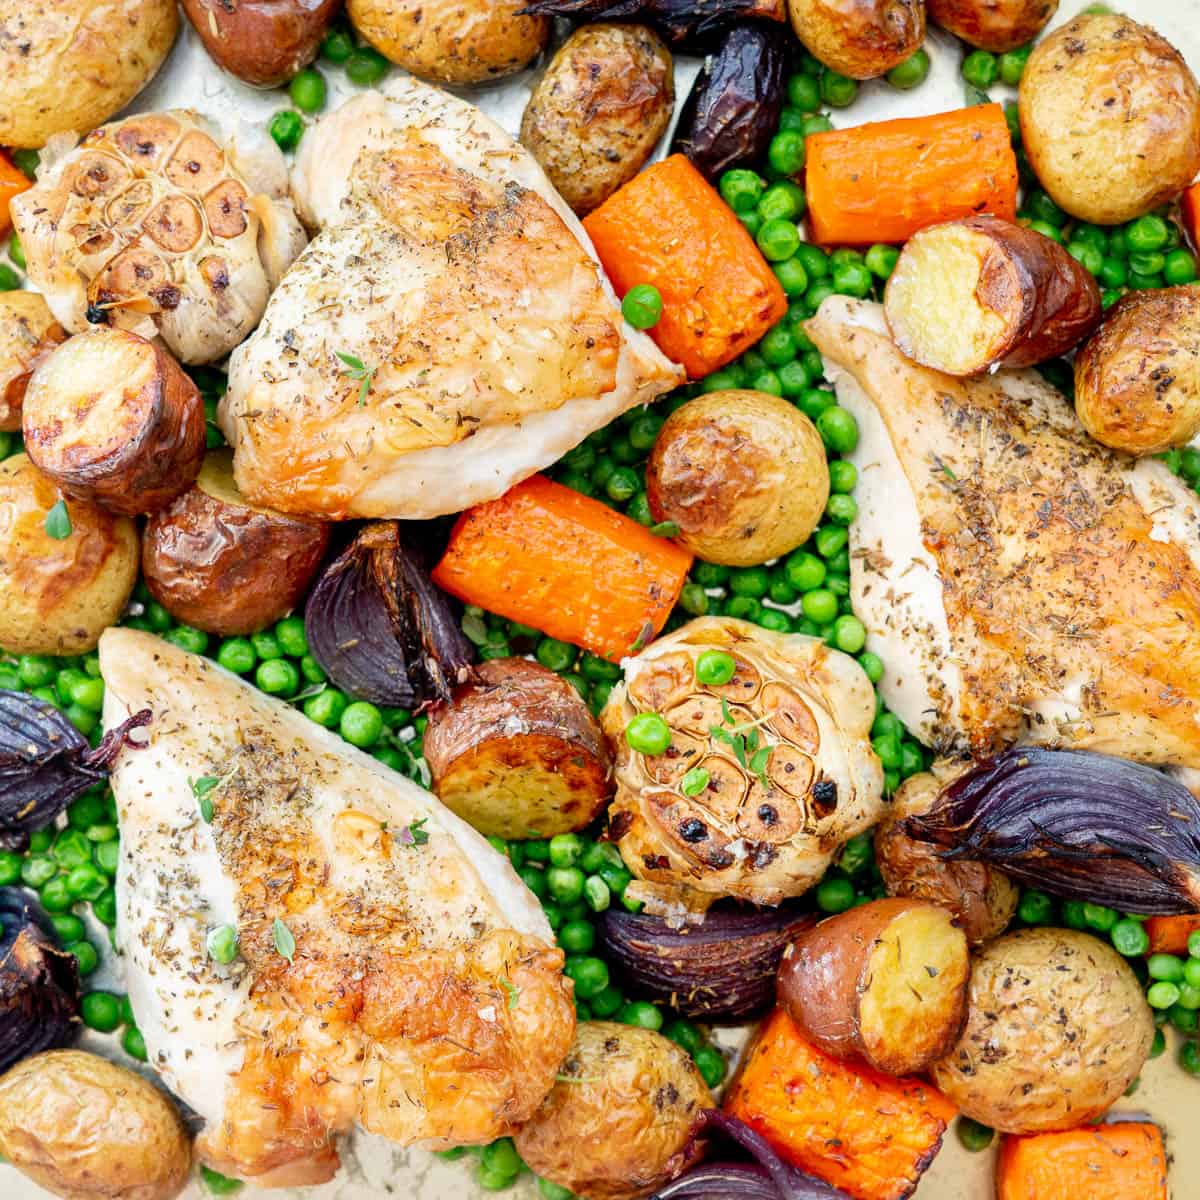 Roasted chicken breasts with crispy skin, roast vegetables and peas in a roasting tray.